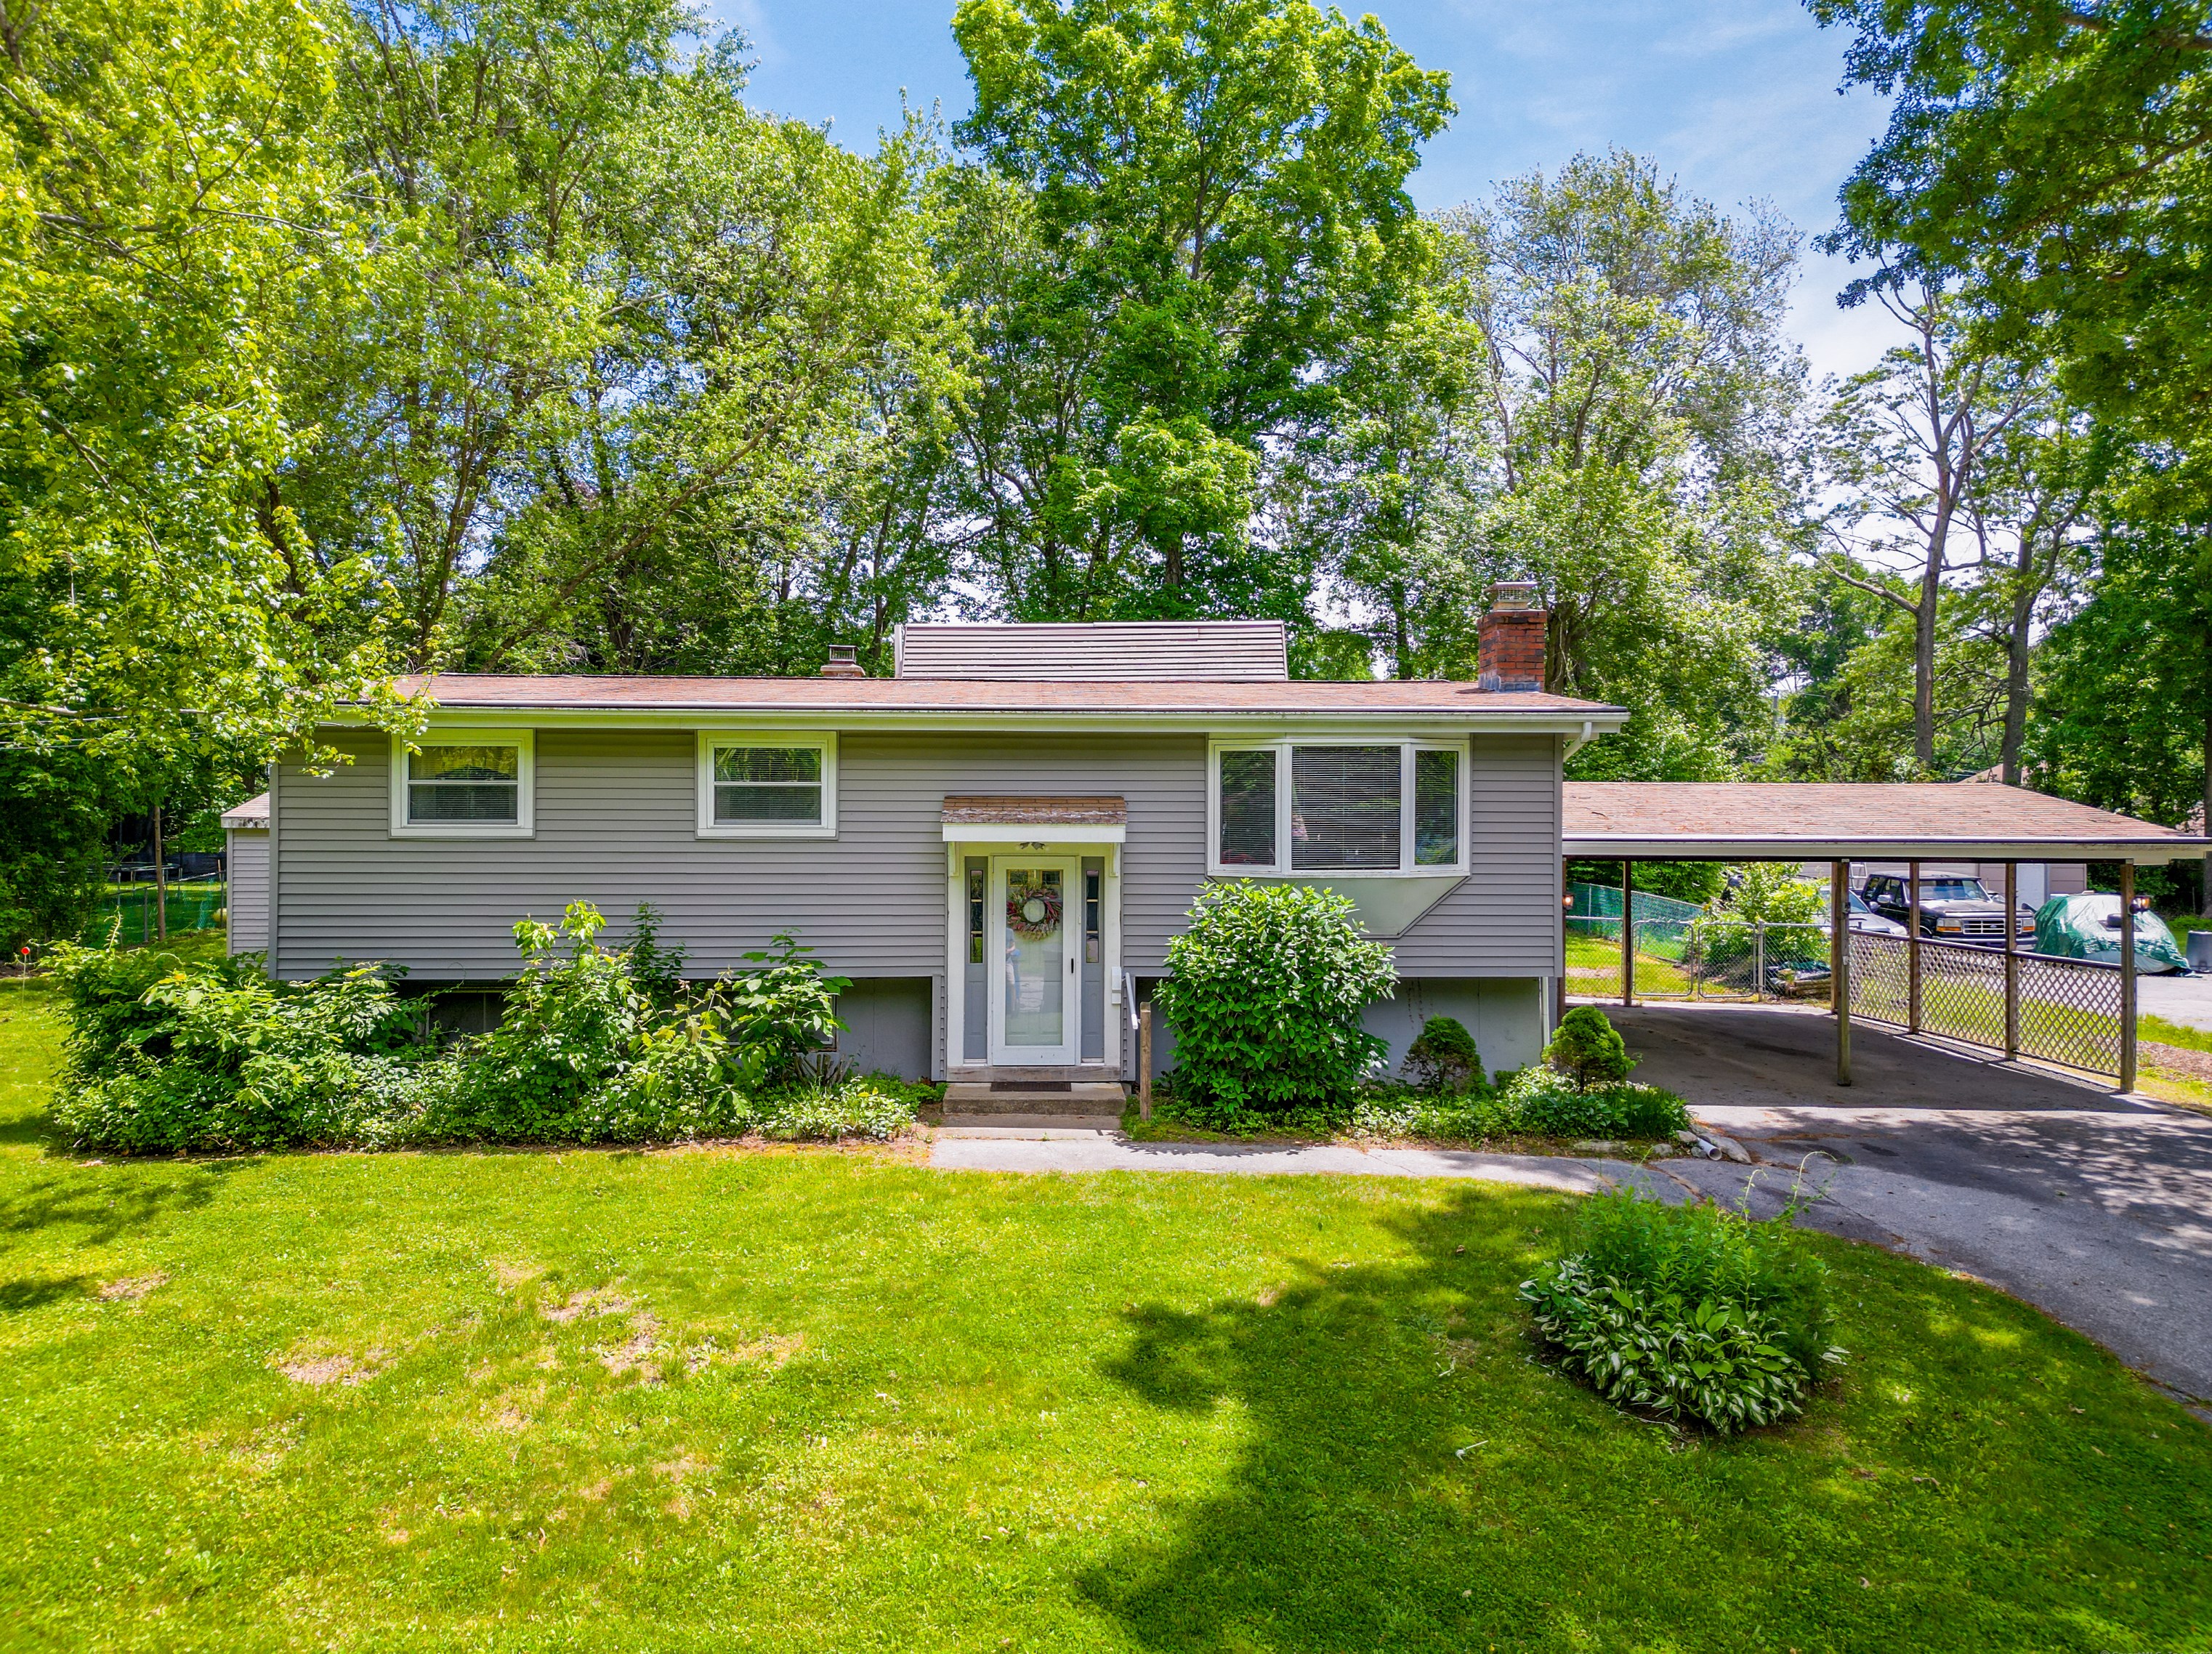 14 Pennywise Ln, Gales Ferry, CT 06339 exterior